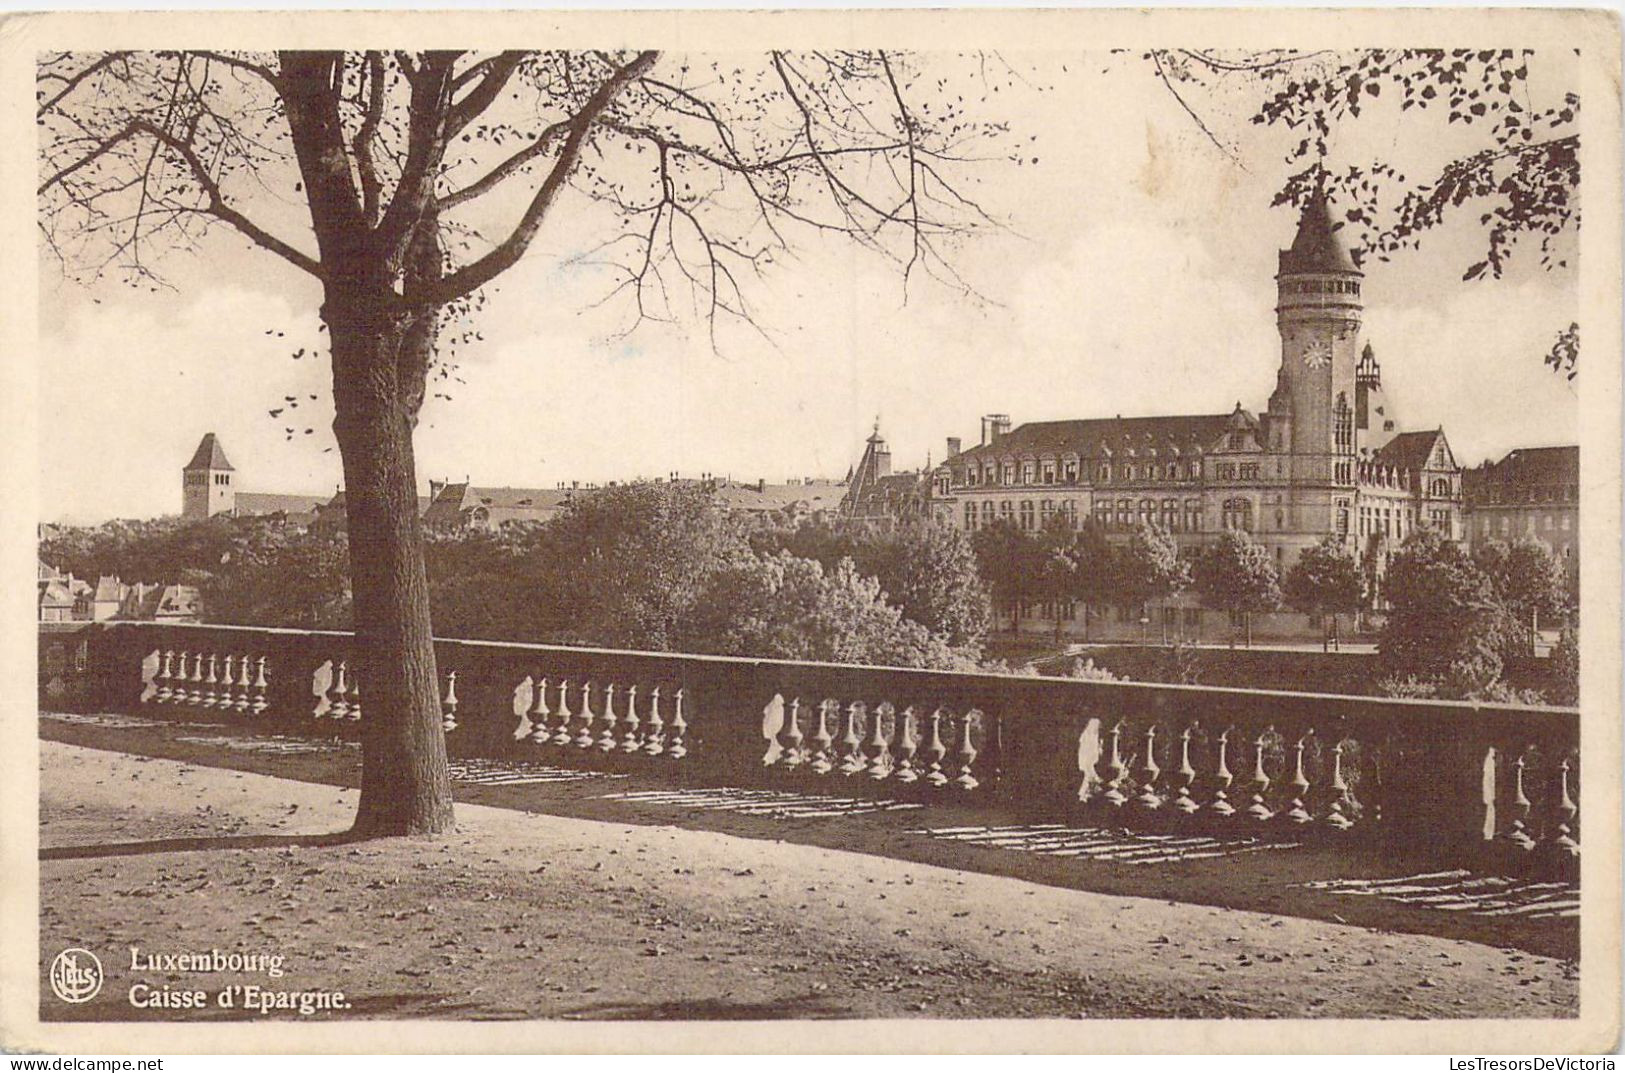 LUXEMBOURG - Caisse D'Epargne - Carte Postale Ancienne - Luxemburg - Stad